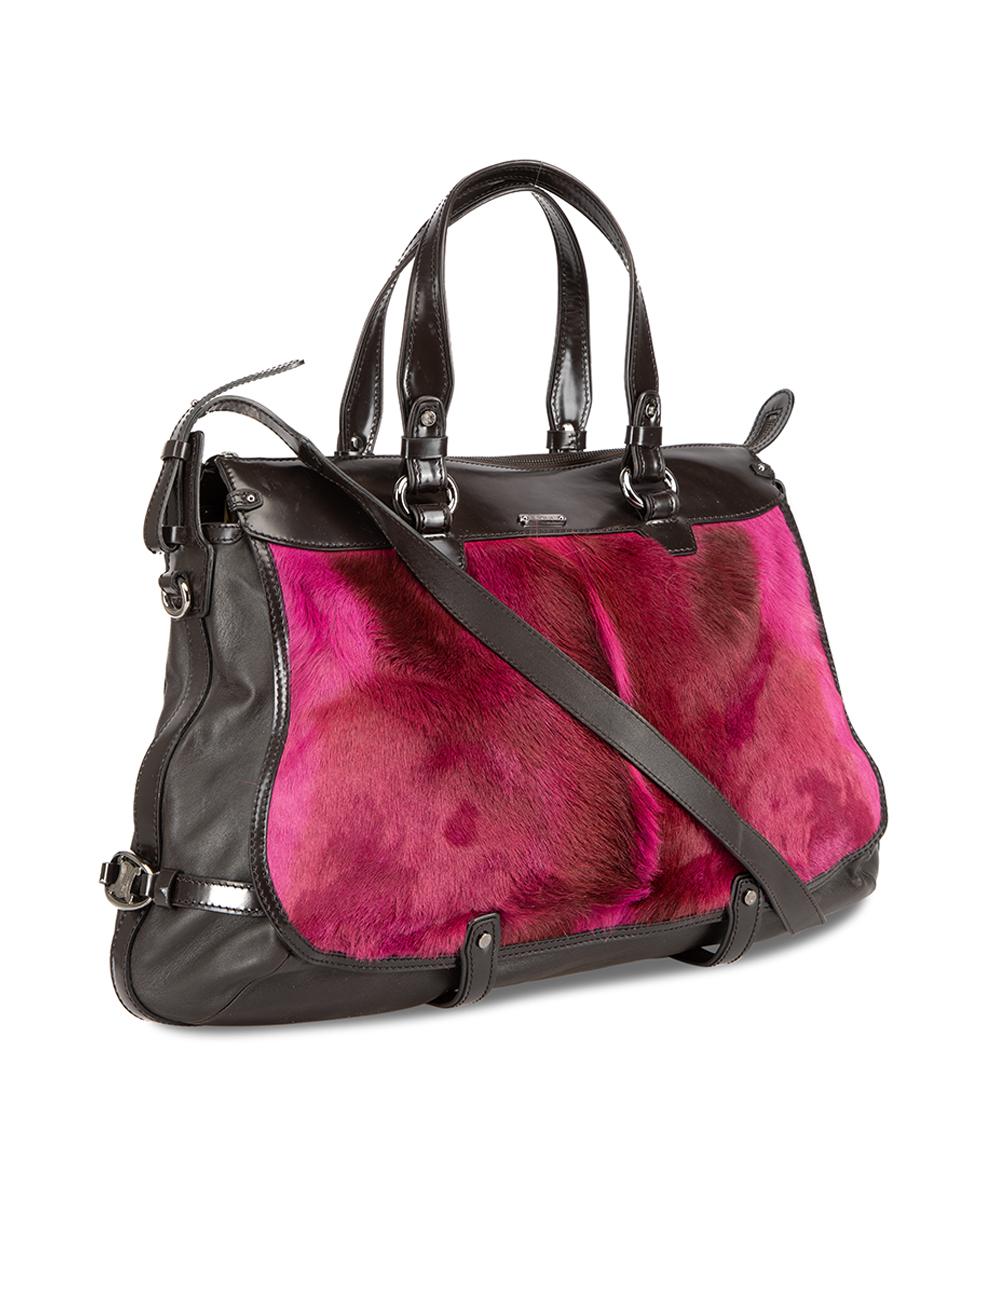 CONDITION is Very good. Minimal wear to bag is evident. Minimal wear to the leather exterior and scuffs can be seen at the bottom and corners of bag on this used Céline designer resale item. 
 
 Details
  Black and pink
 Leather and goat hair
 Large